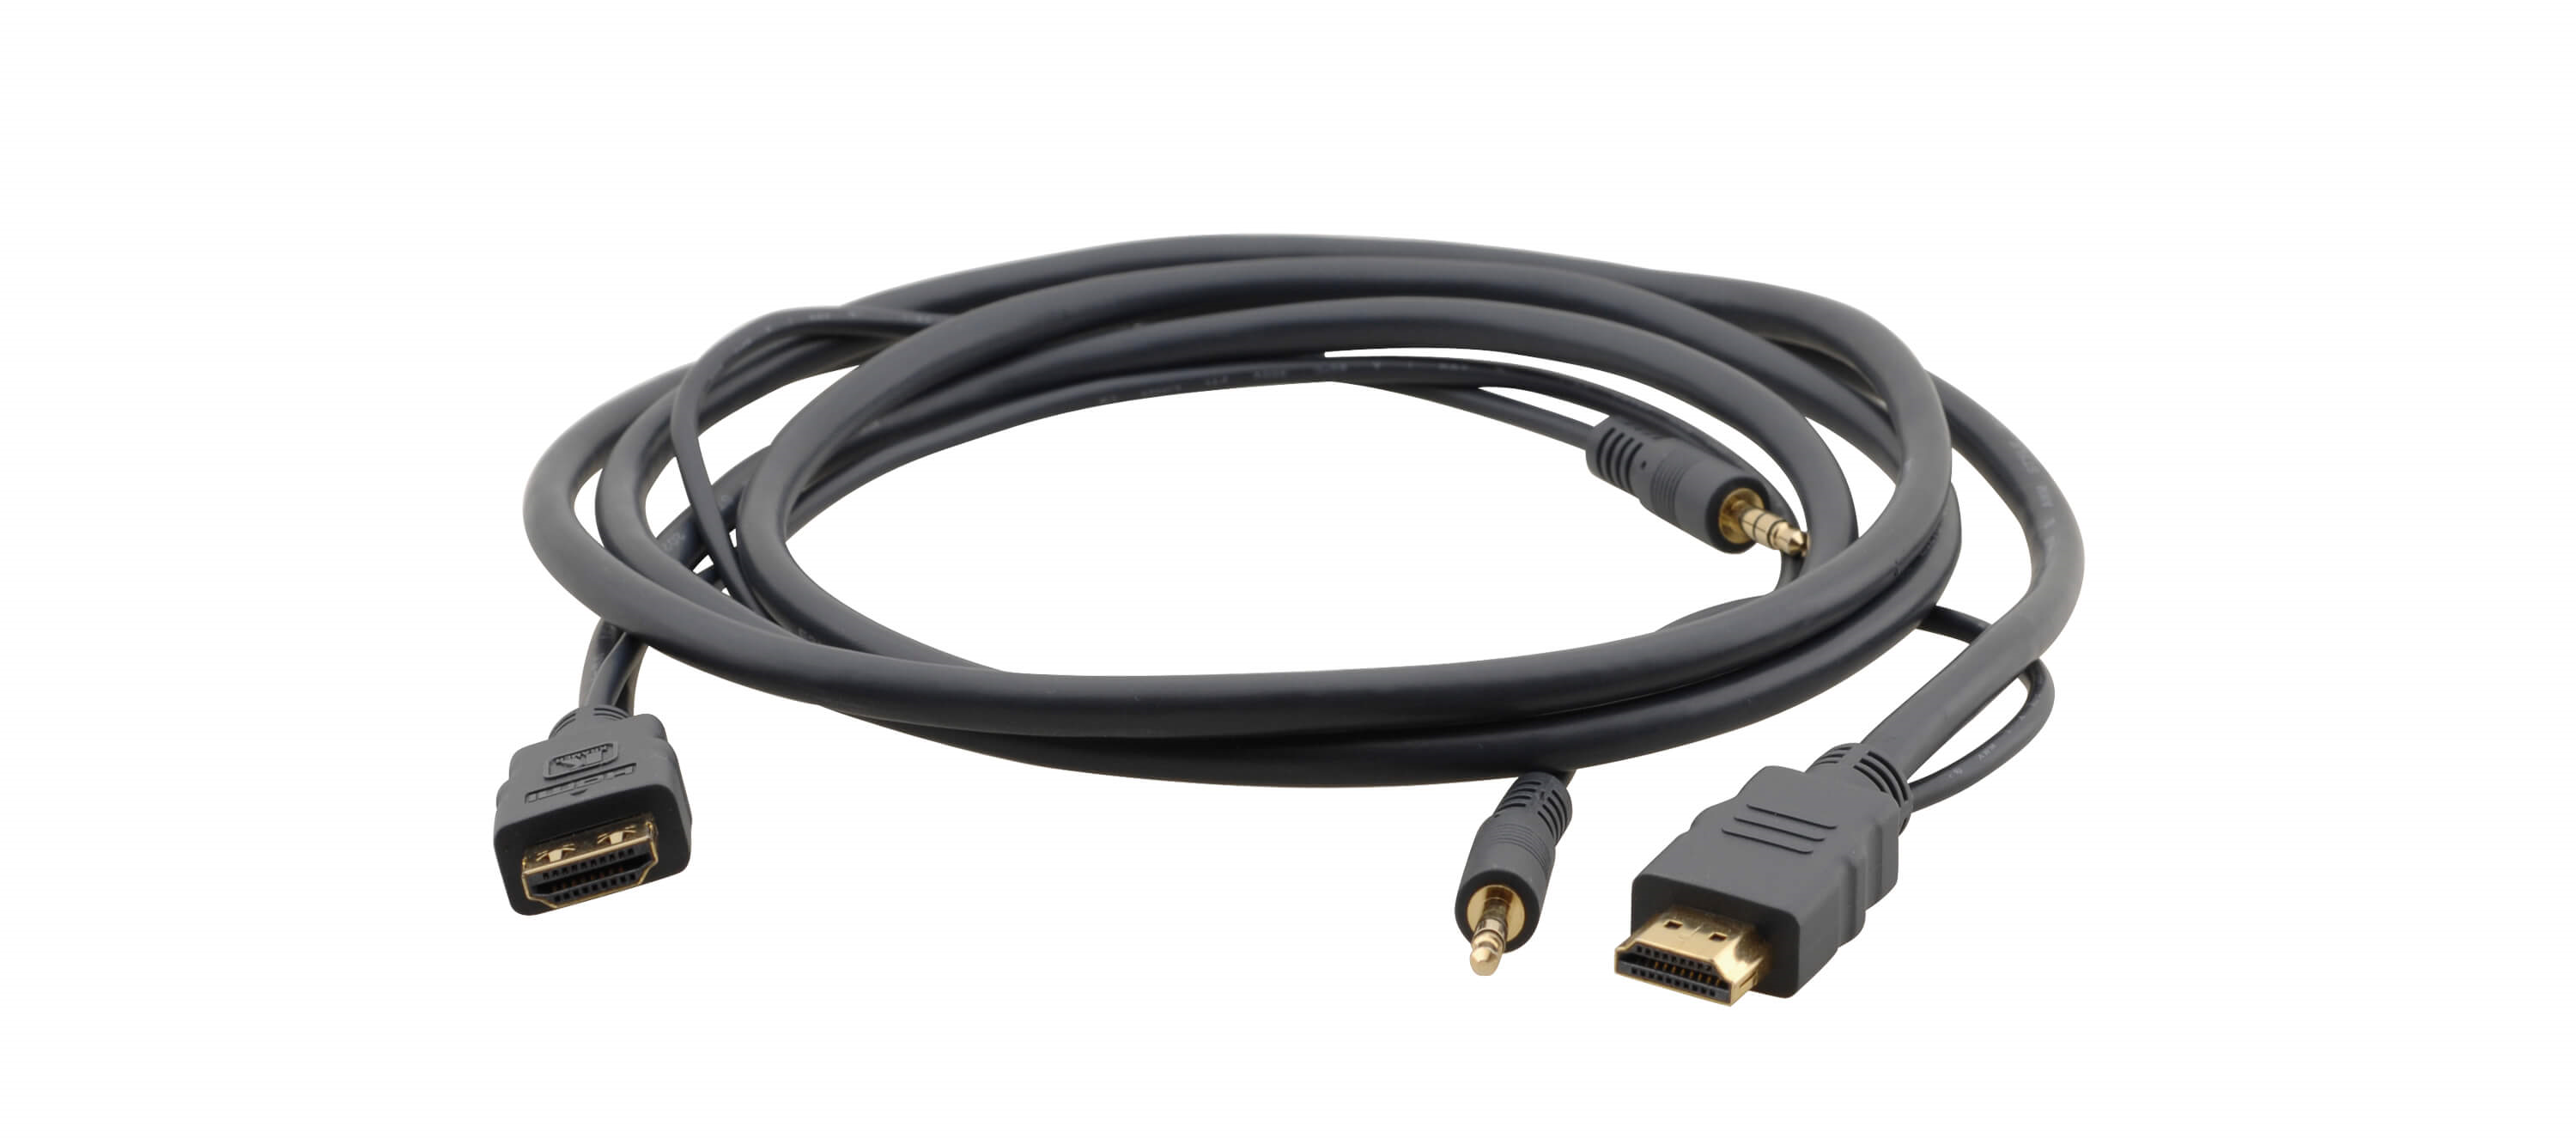 C-MHMA/MHMA-3 Flexible High–Speed HDMI Cable with Ethernet & 3.5mm Stereo Audio - 3'